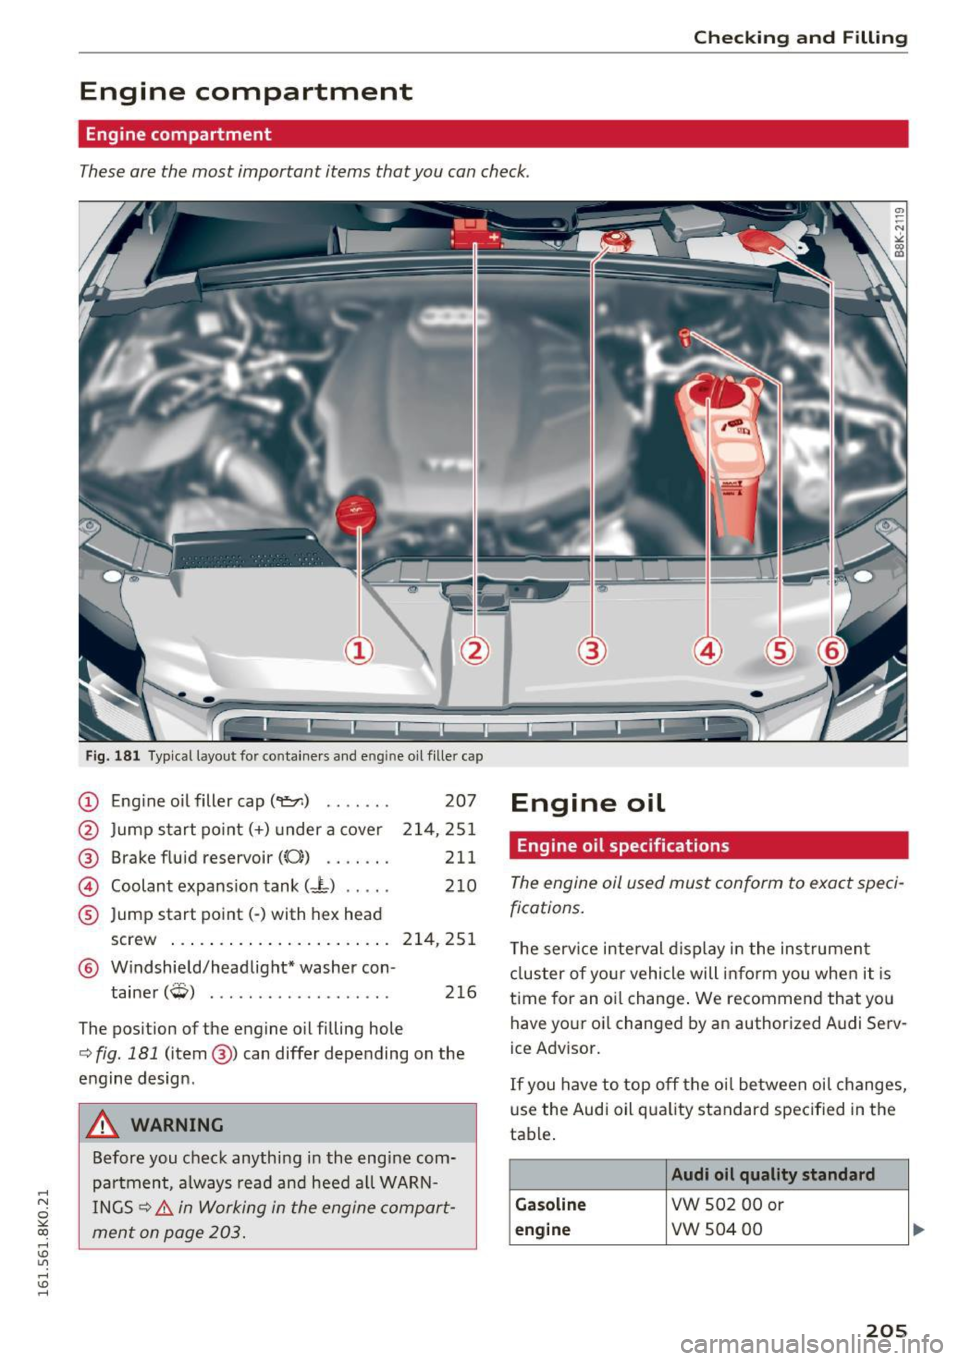 AUDI A4 2016  Owners Manual ,...., 
N 
0 
"" CX) ,...., 
I.Cl U"I ,...., 
I.Cl ,...., 
Checking  and Filling 
Engine  compartment 
Engine  compartment 
These are the  most  important  items  that you  can check. 
Fig. 181 Typic